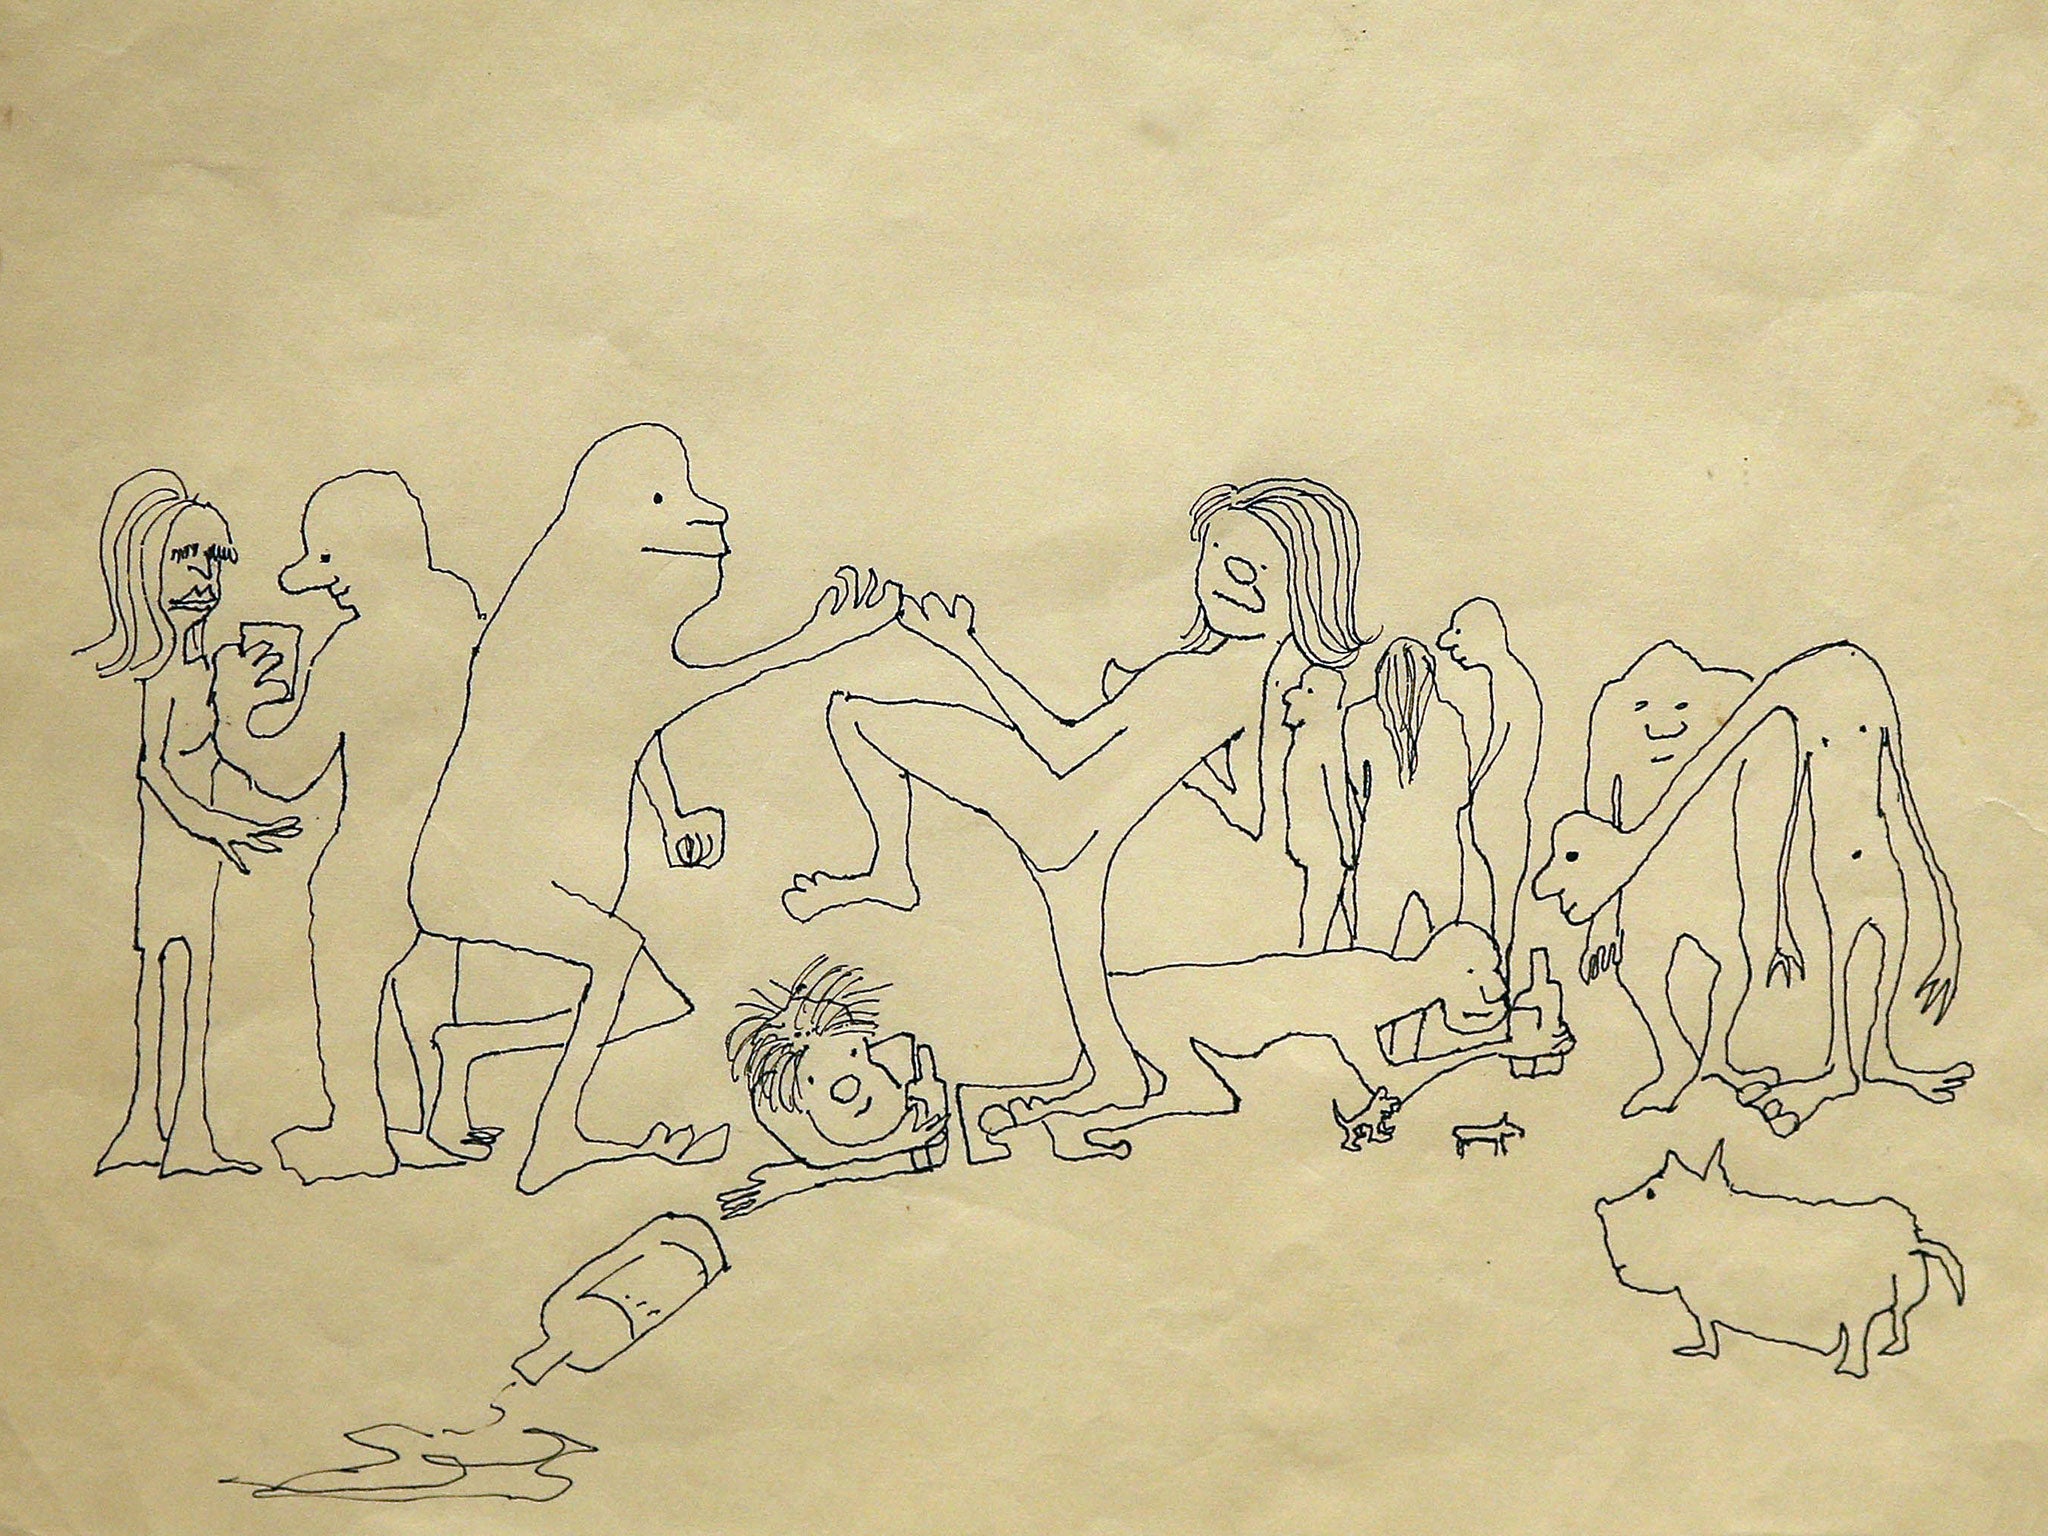 This cartoon-style sketch by John Lennon was sold at Sotheby's in New York in June